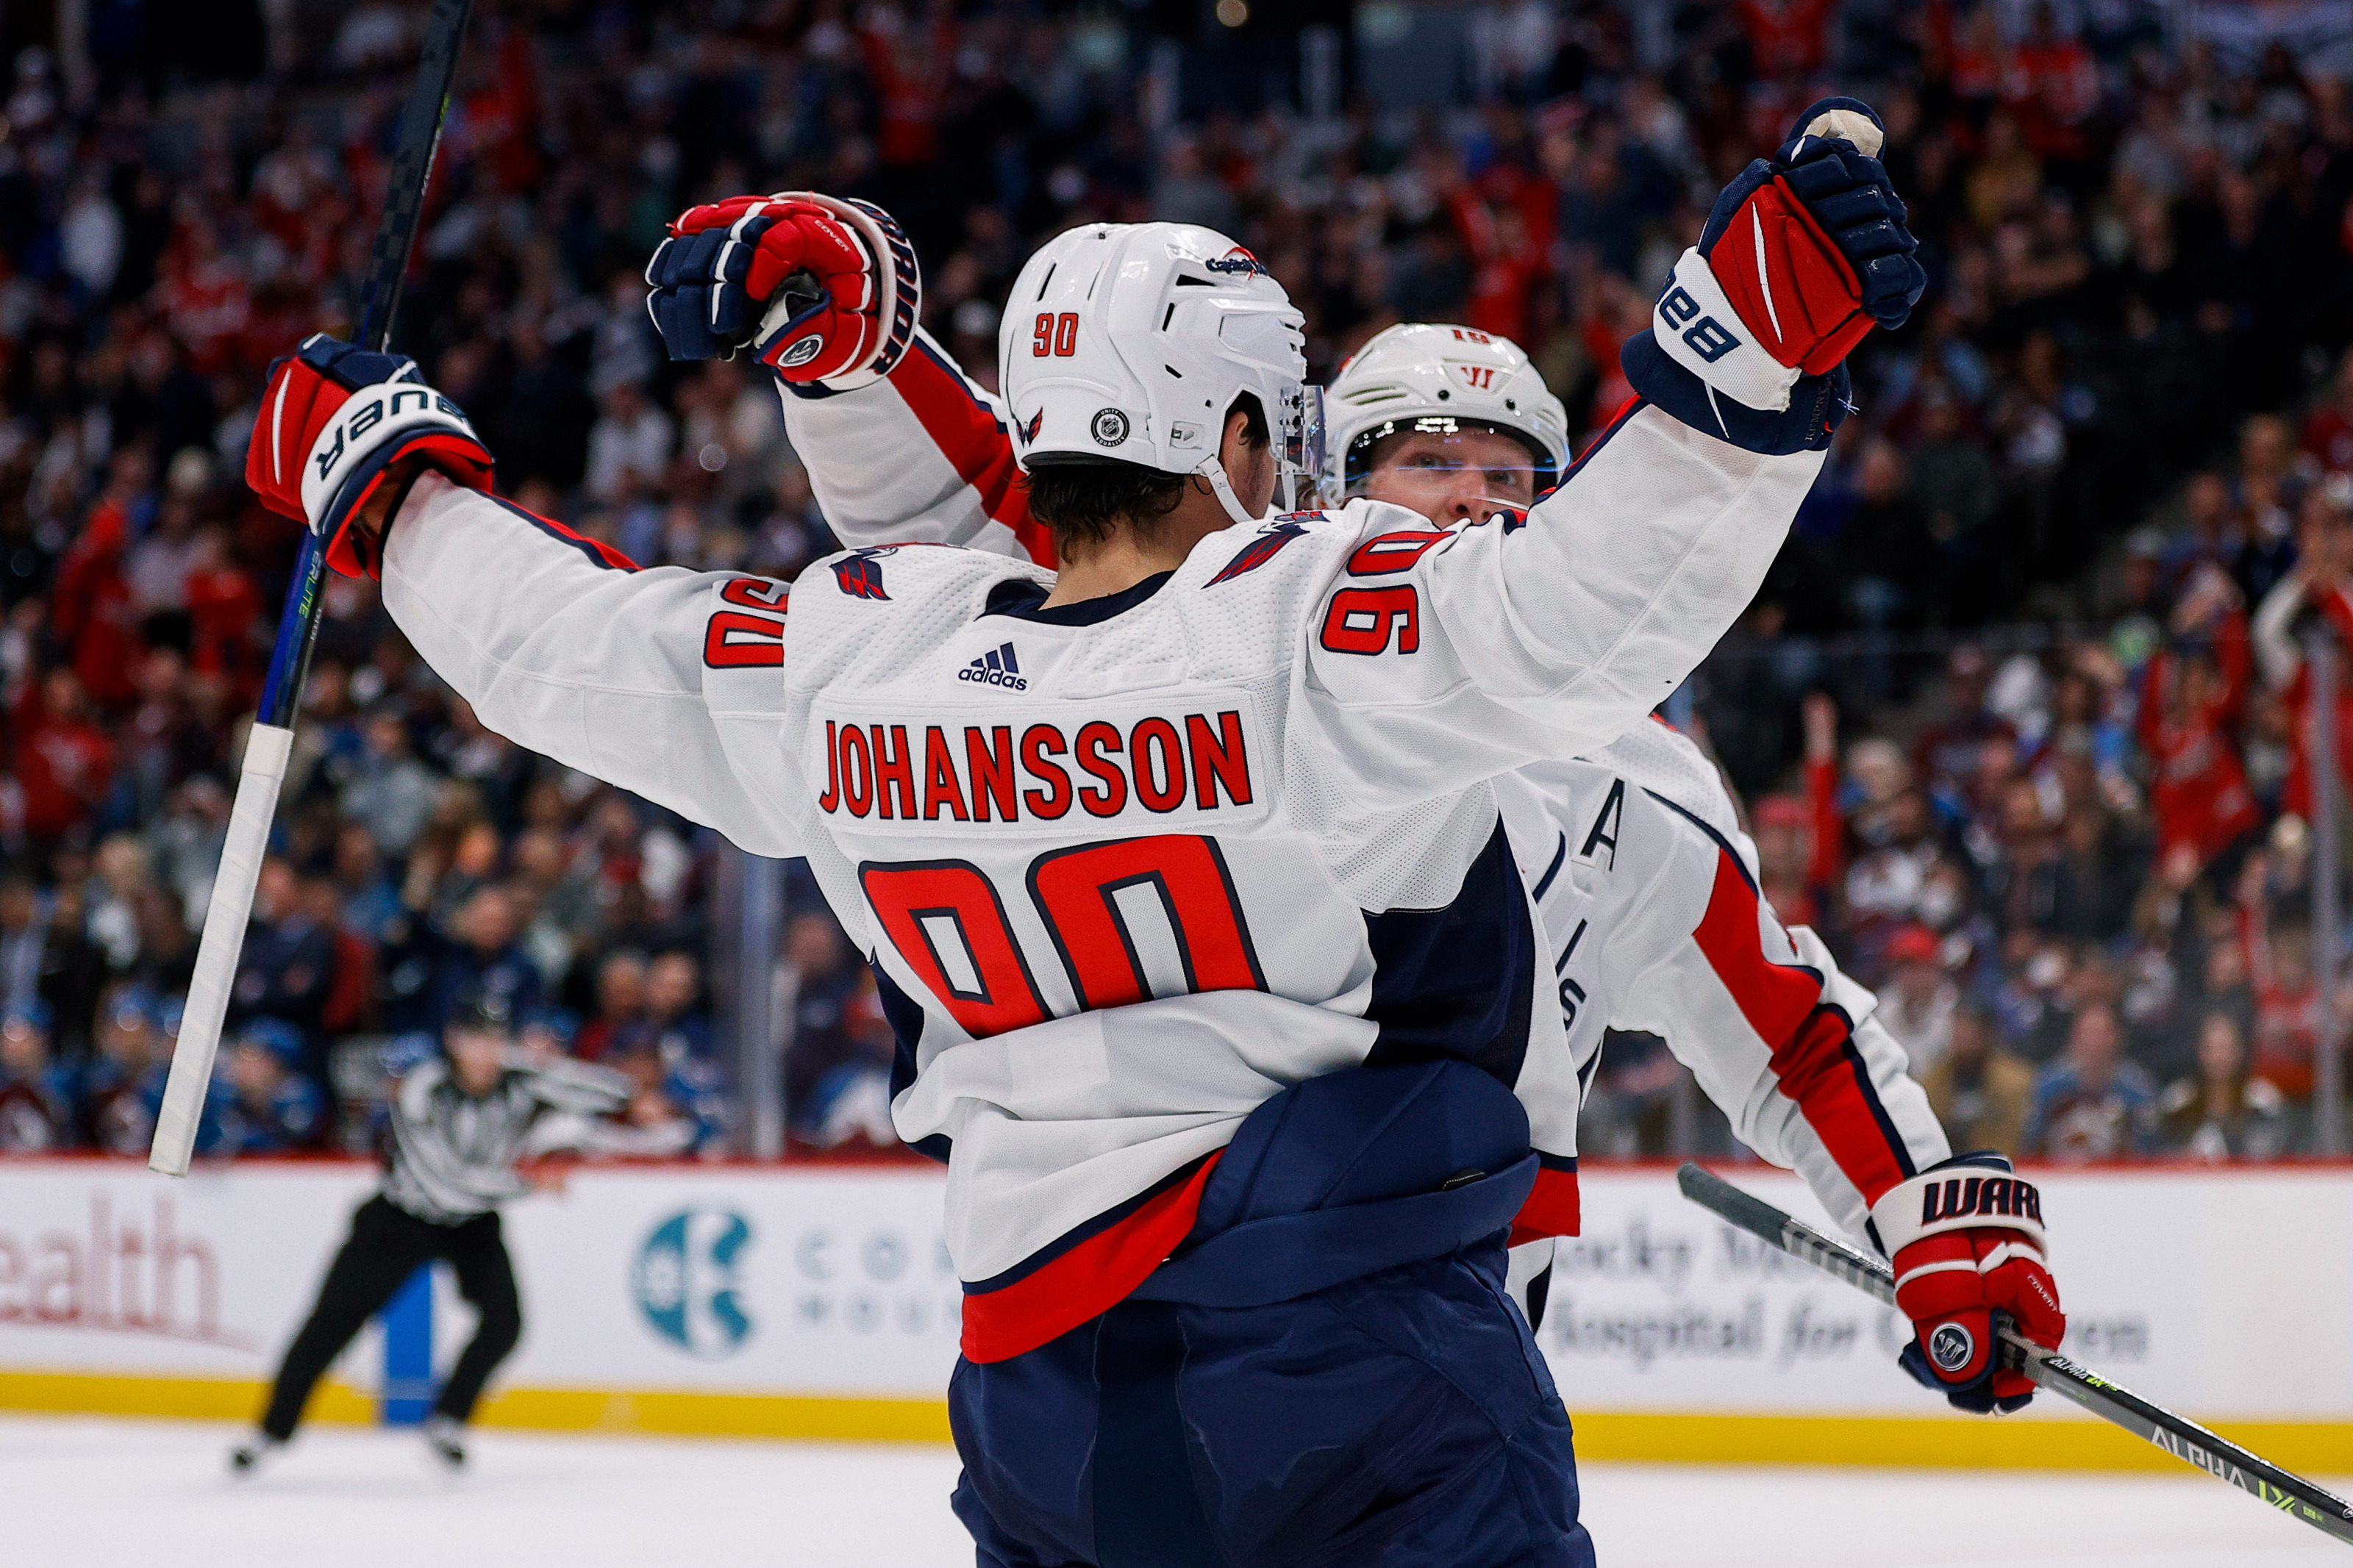 Marcus Johansson scores twice in late comeback win for shorthanded